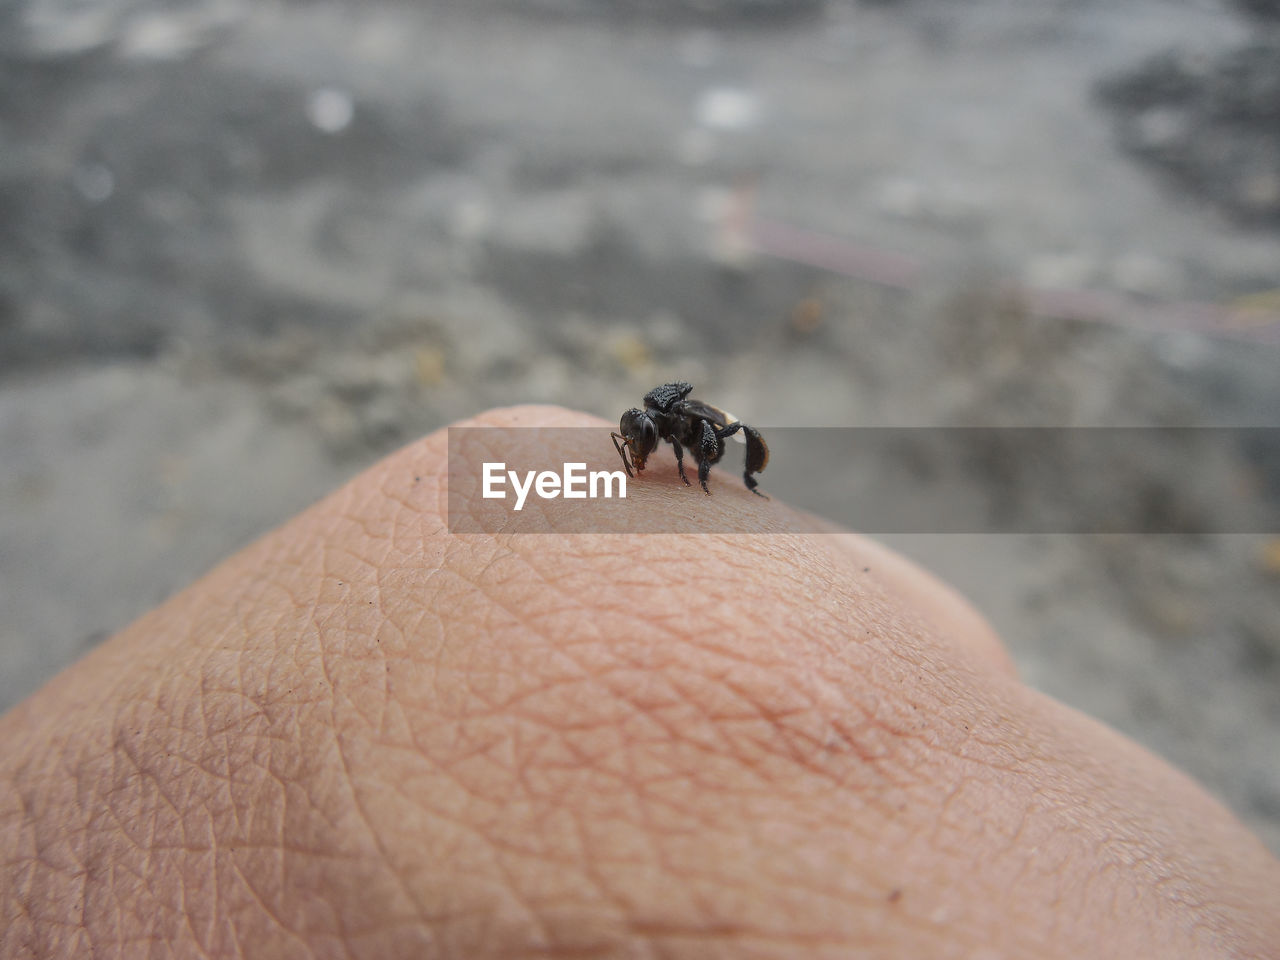 CLOSE-UP OF INSECT ON HUMAN HAND